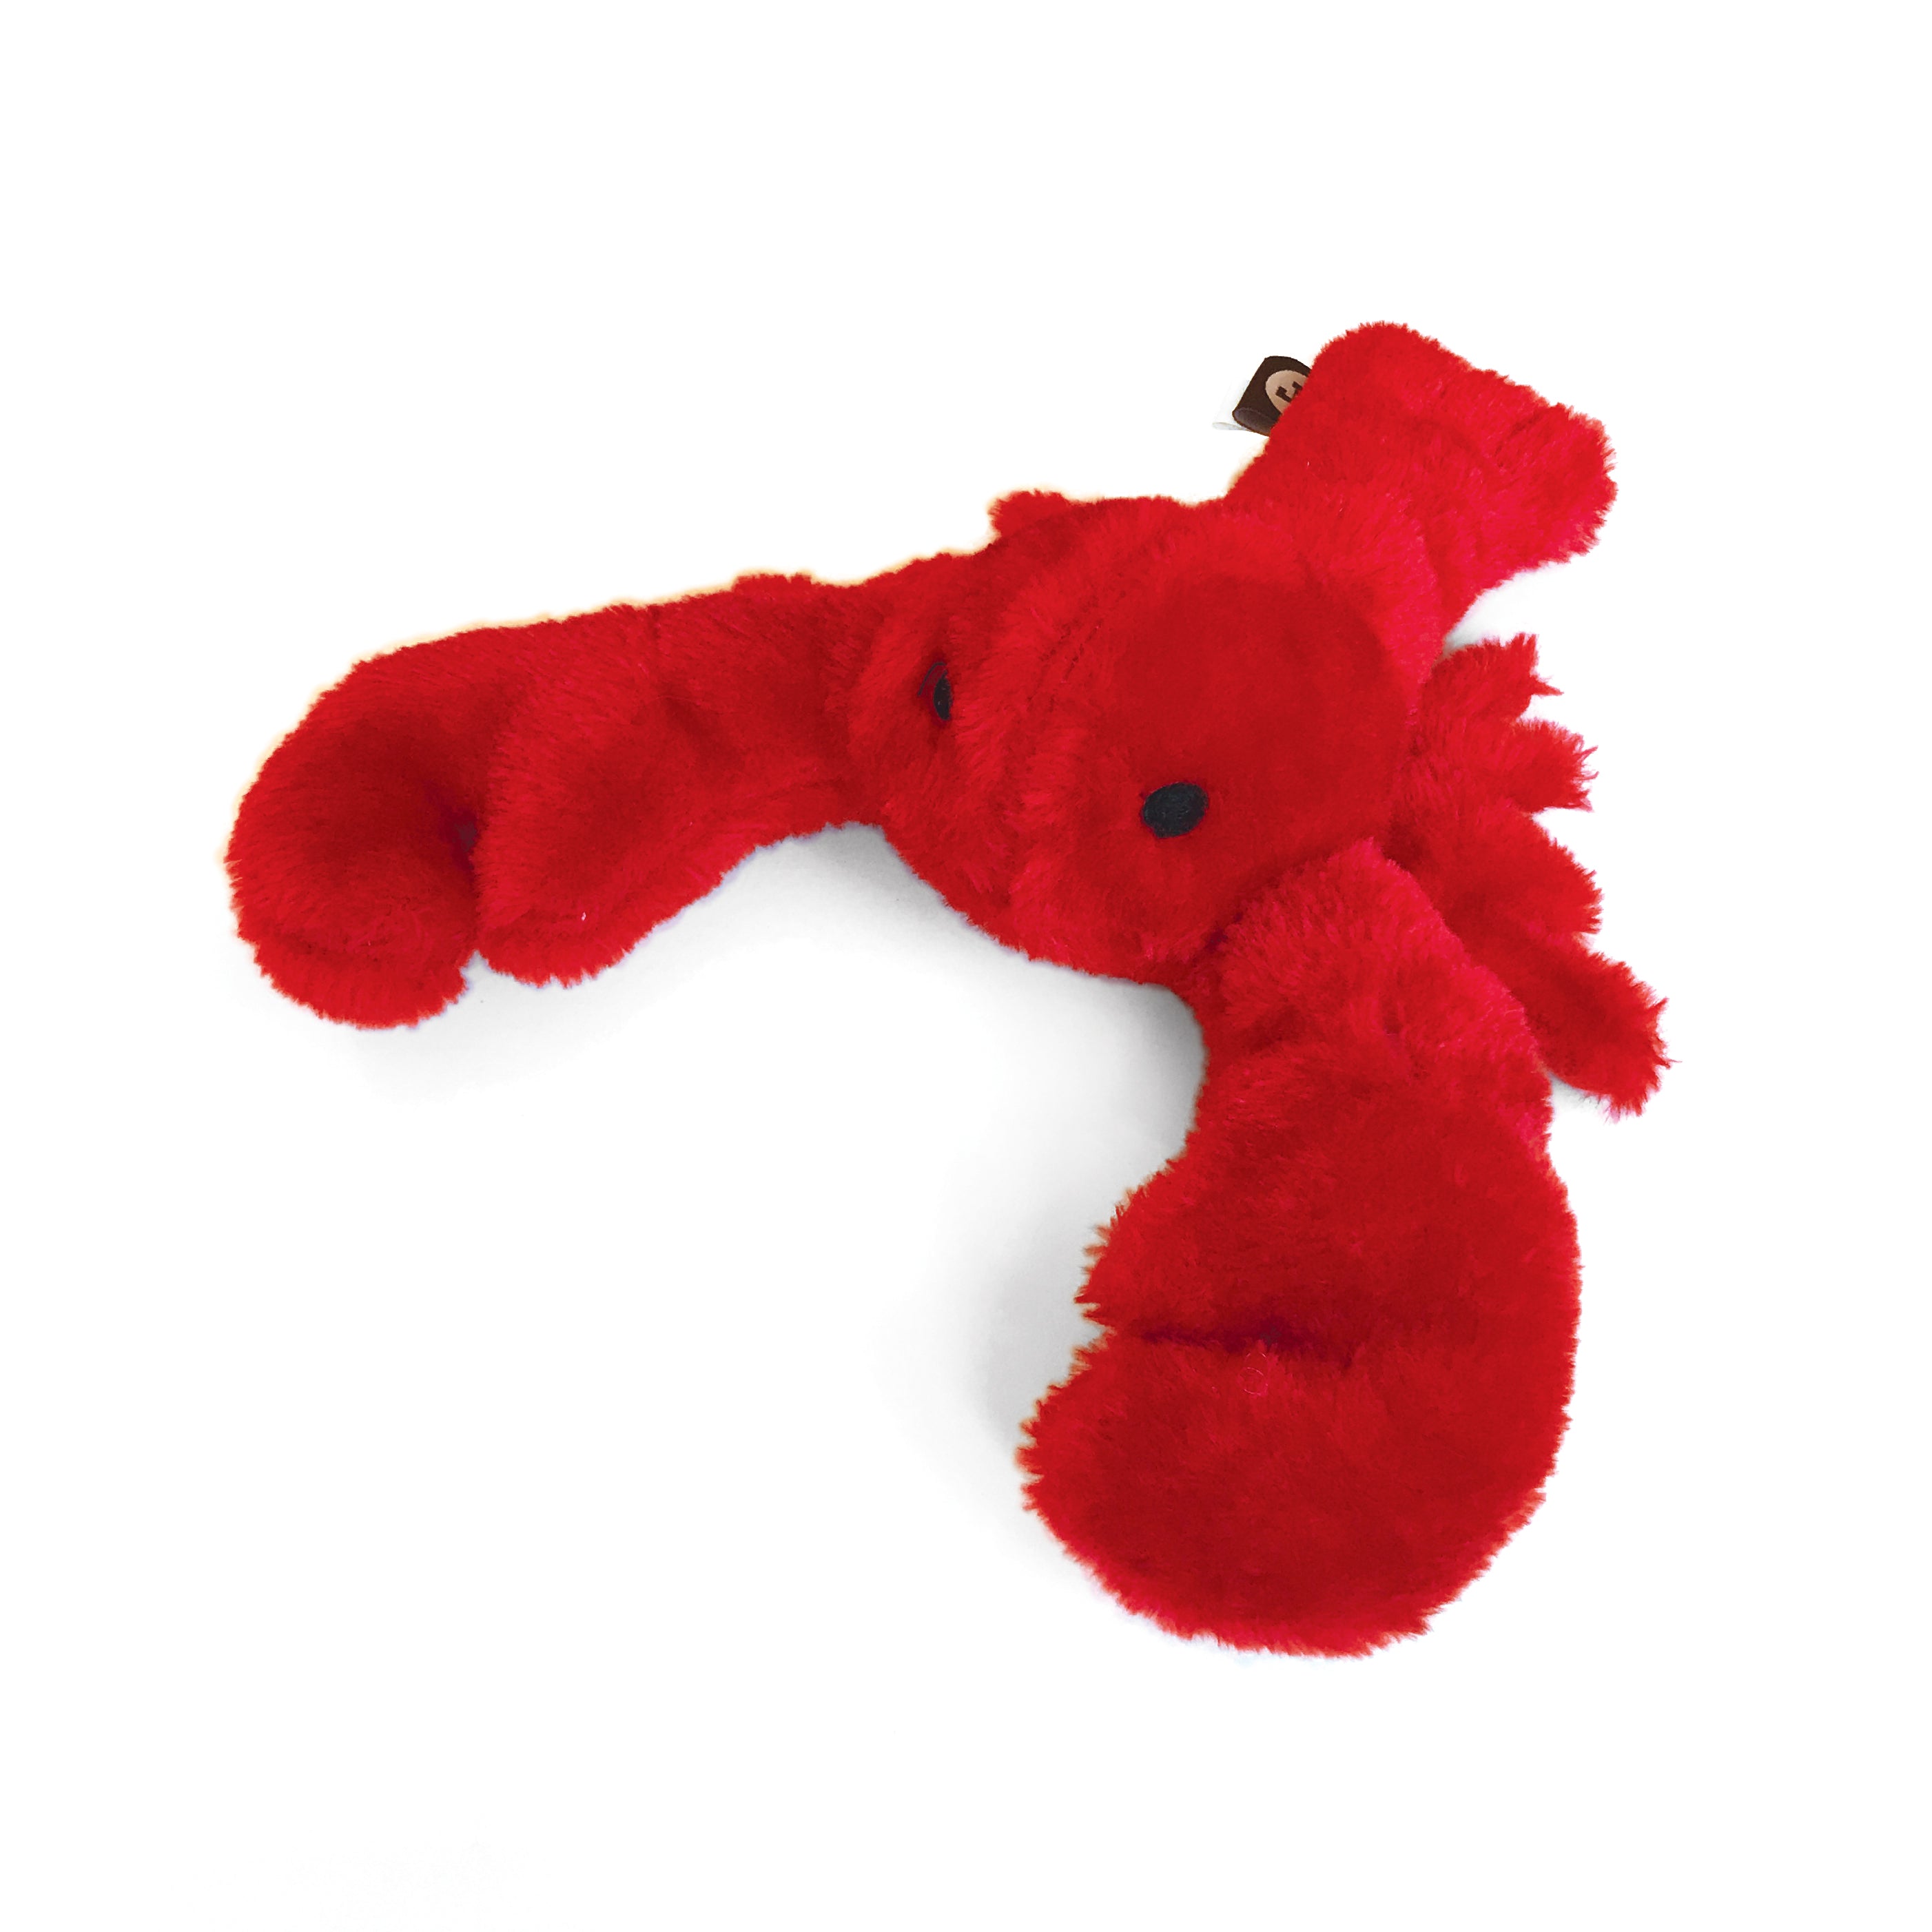 Timmie Atlantic Lobster Dog Toy